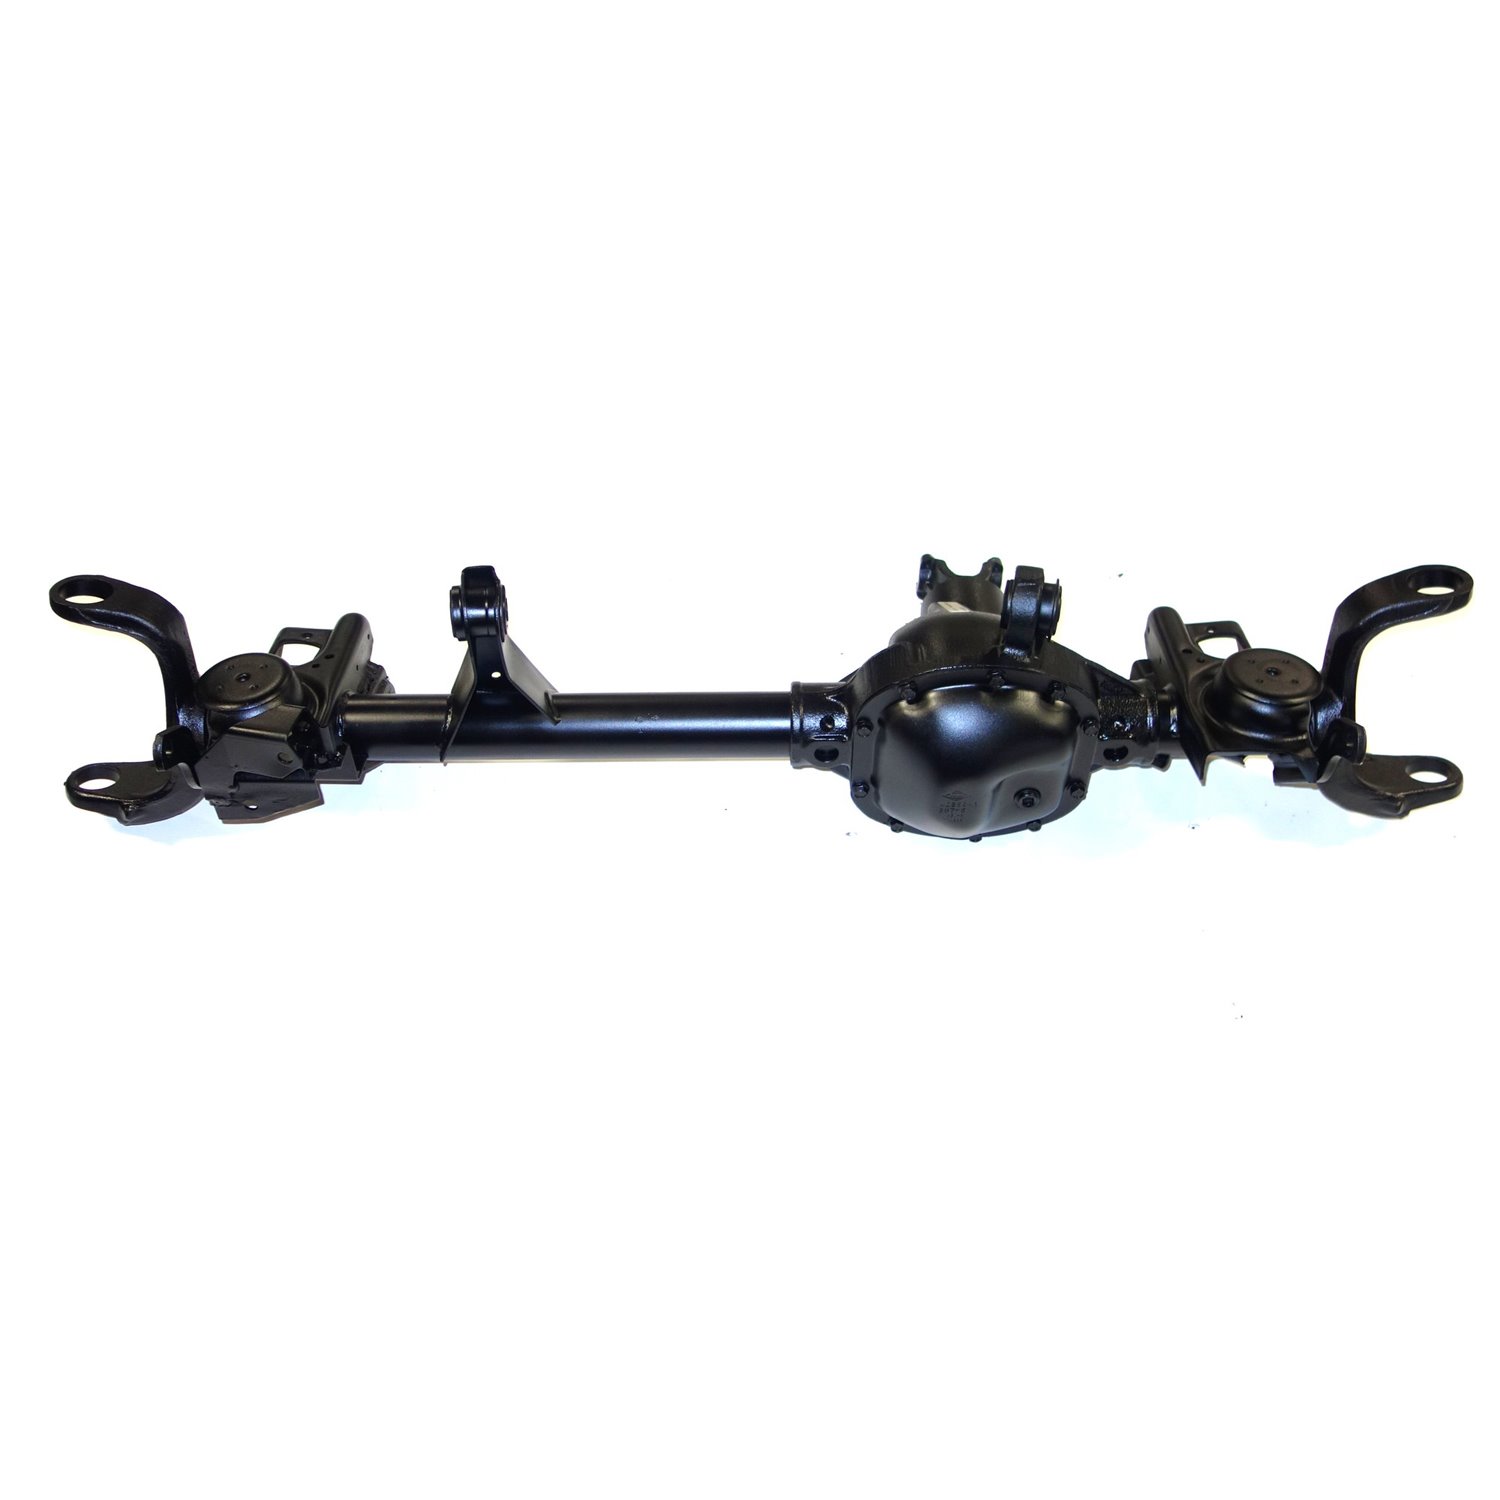 Remanufactured Complete Axle Assembly for Dana 30 09-10 Jeep Wrangler LHD, 3.73 Ratio